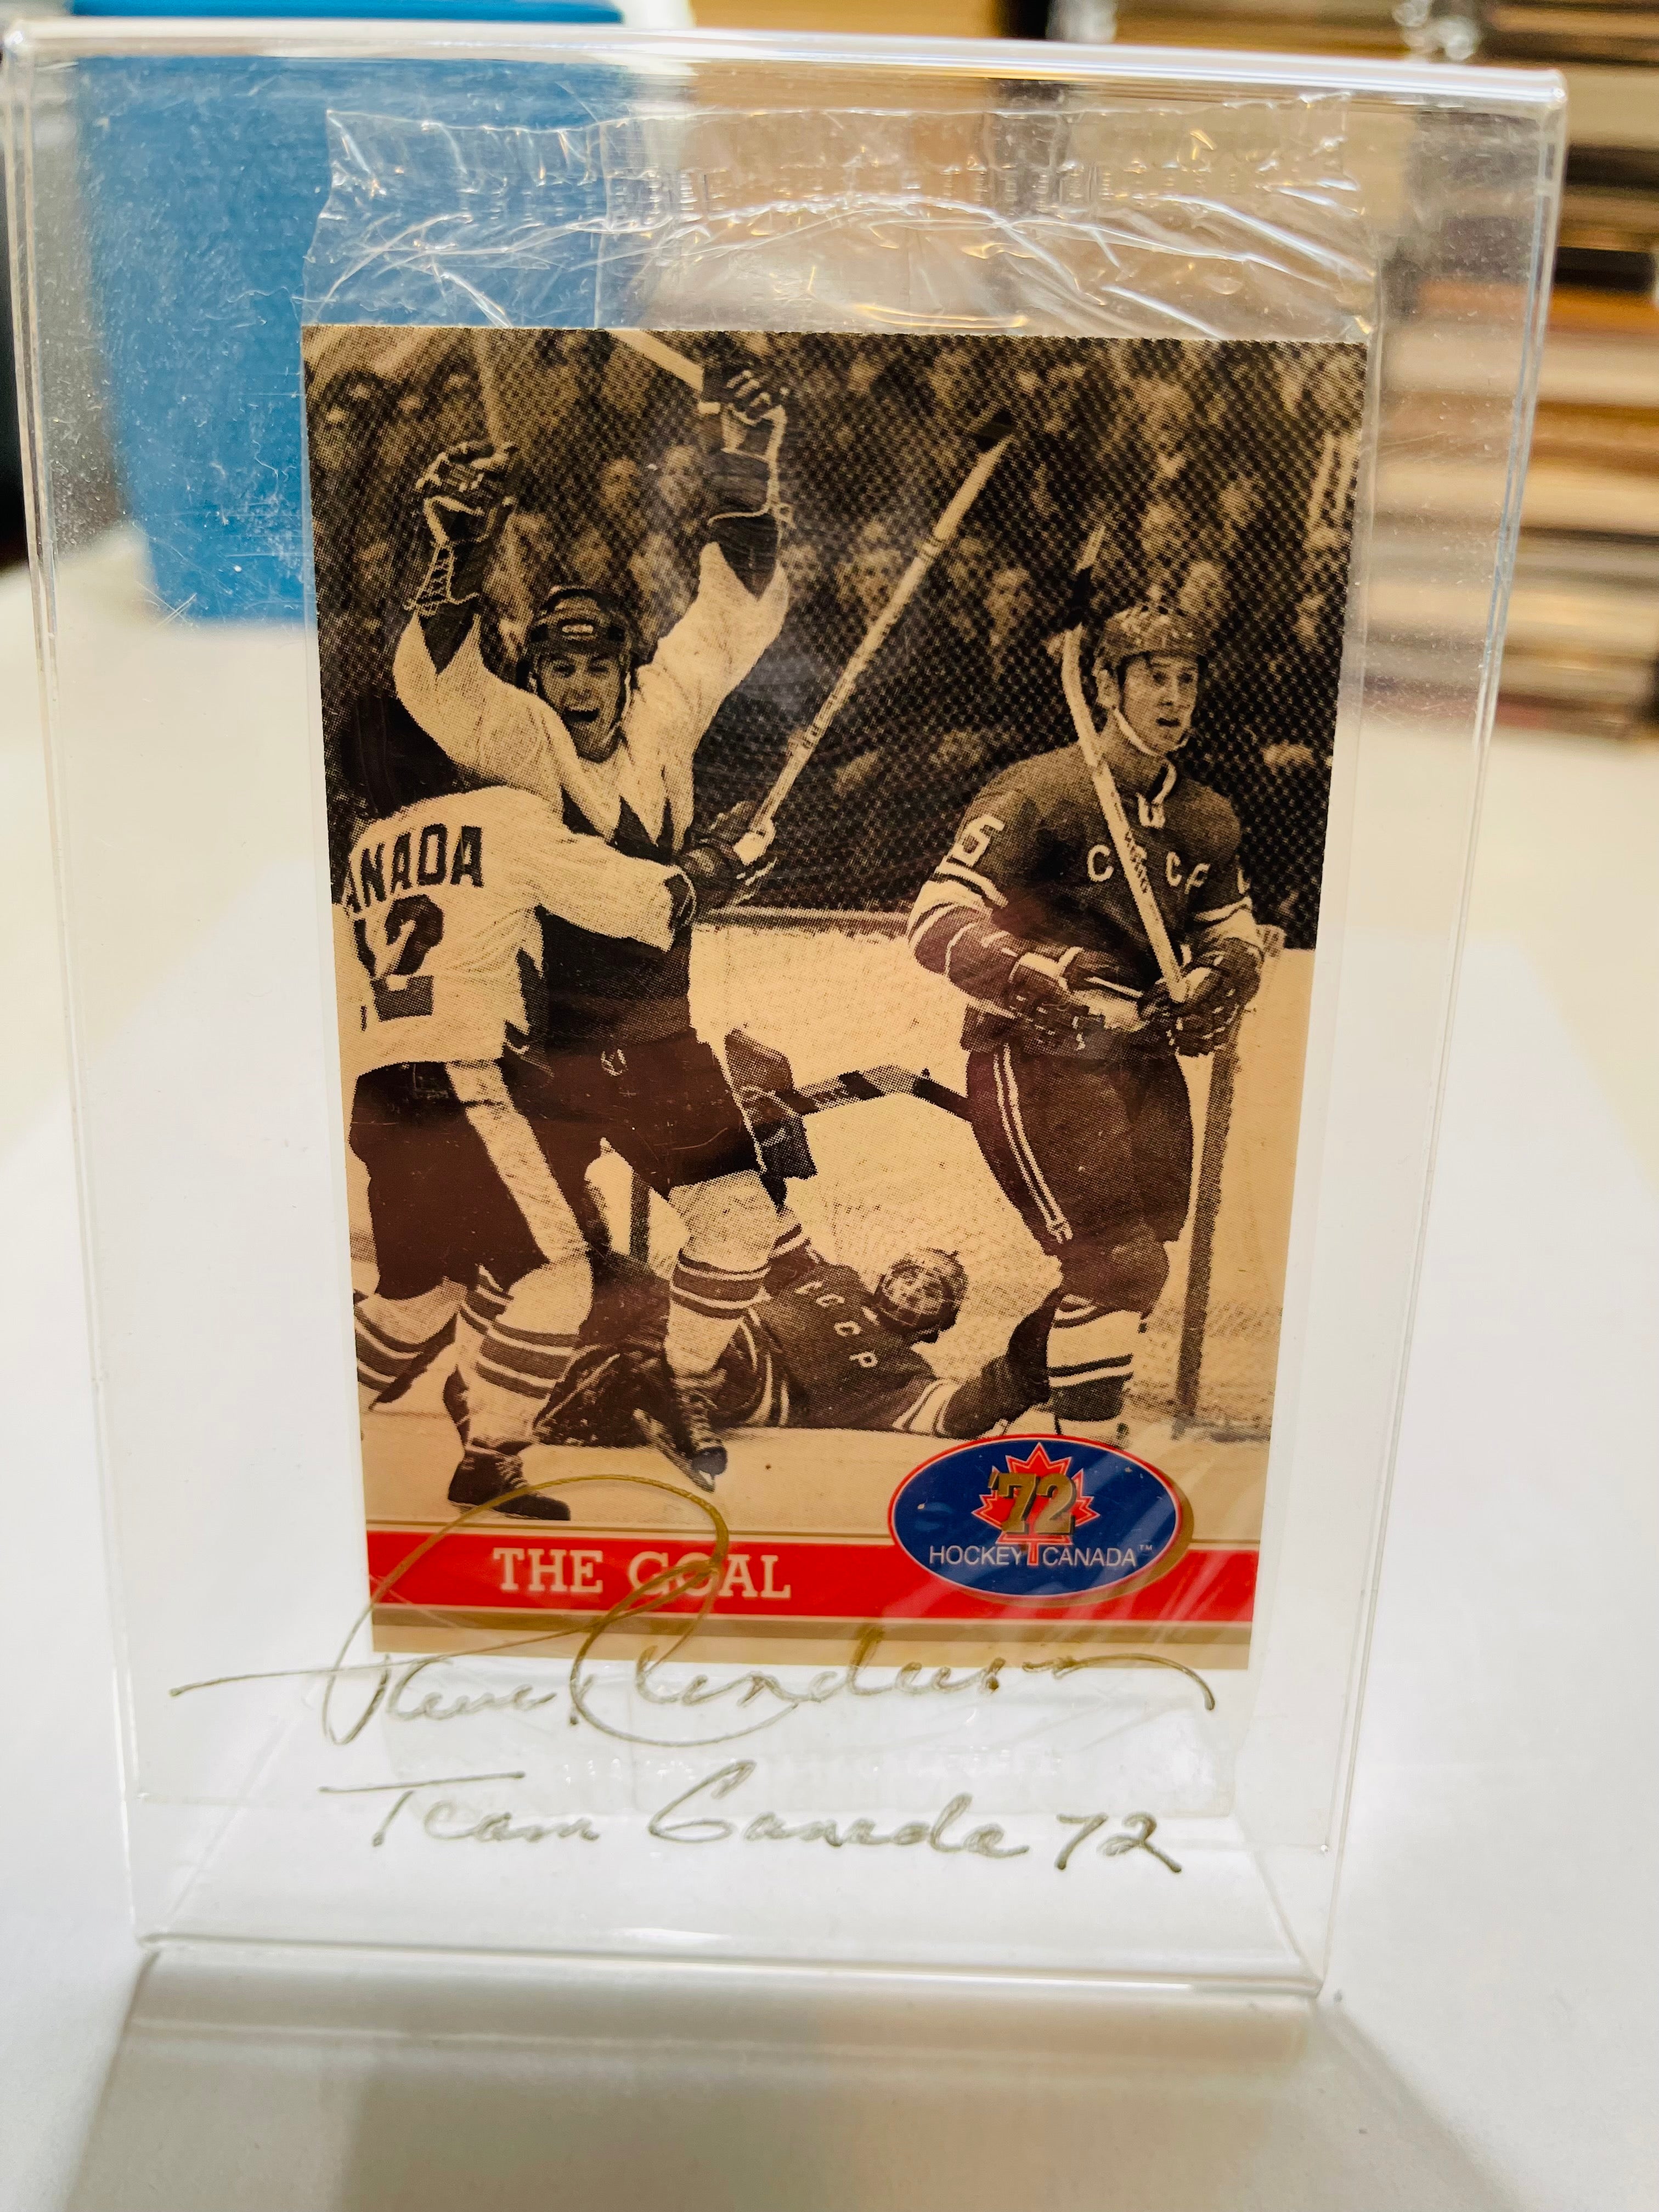 Paul Henderson autograph plastic holder with team Canada cards promo pack